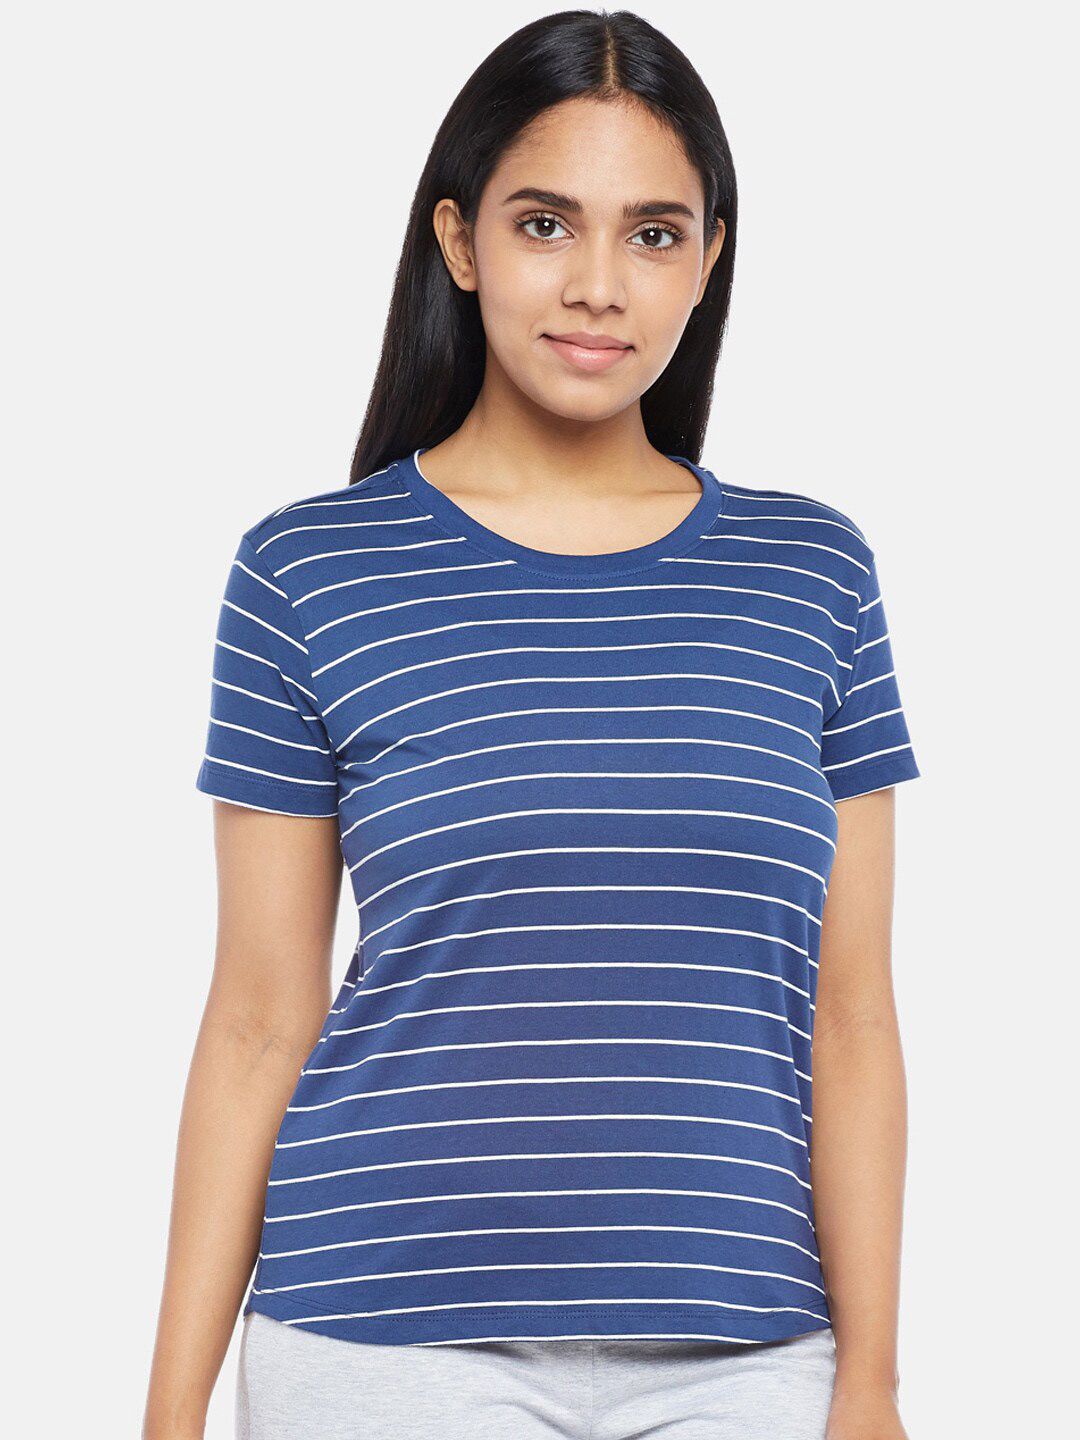 Dreamz by Pantaloons Women Blue Striped Lounge T-shirt Price in India